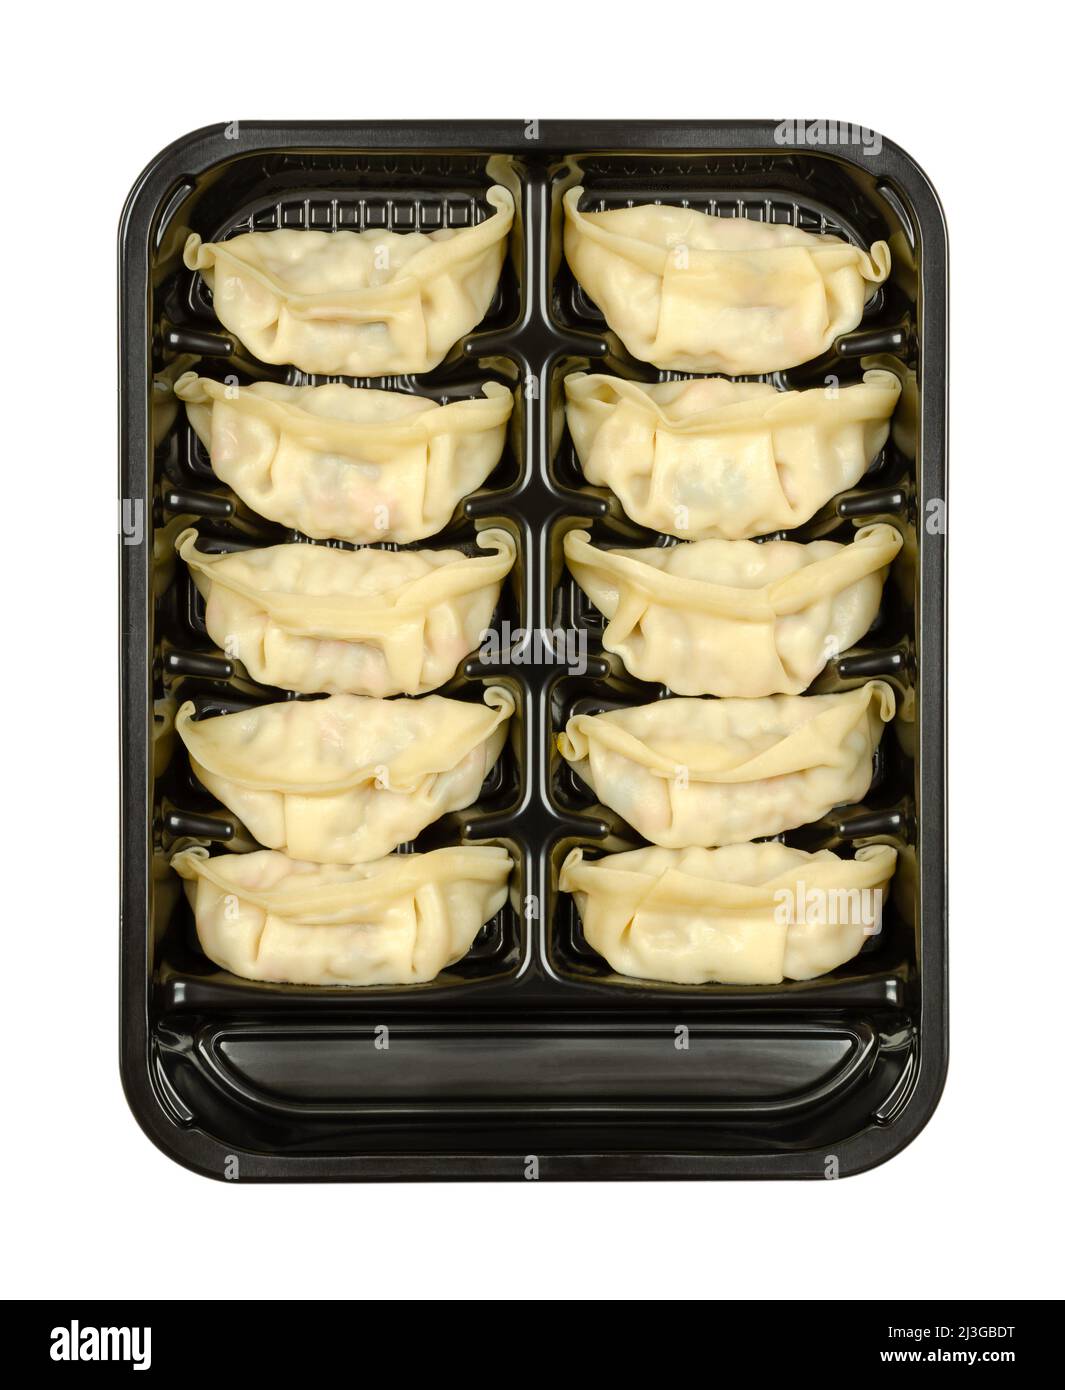 Gyoza, Japanese dumplings, in a black plastic tray. Uncooked, filled dumplings, ready to boil or fry. Filling, wrapped in thin batter. Stock Photo